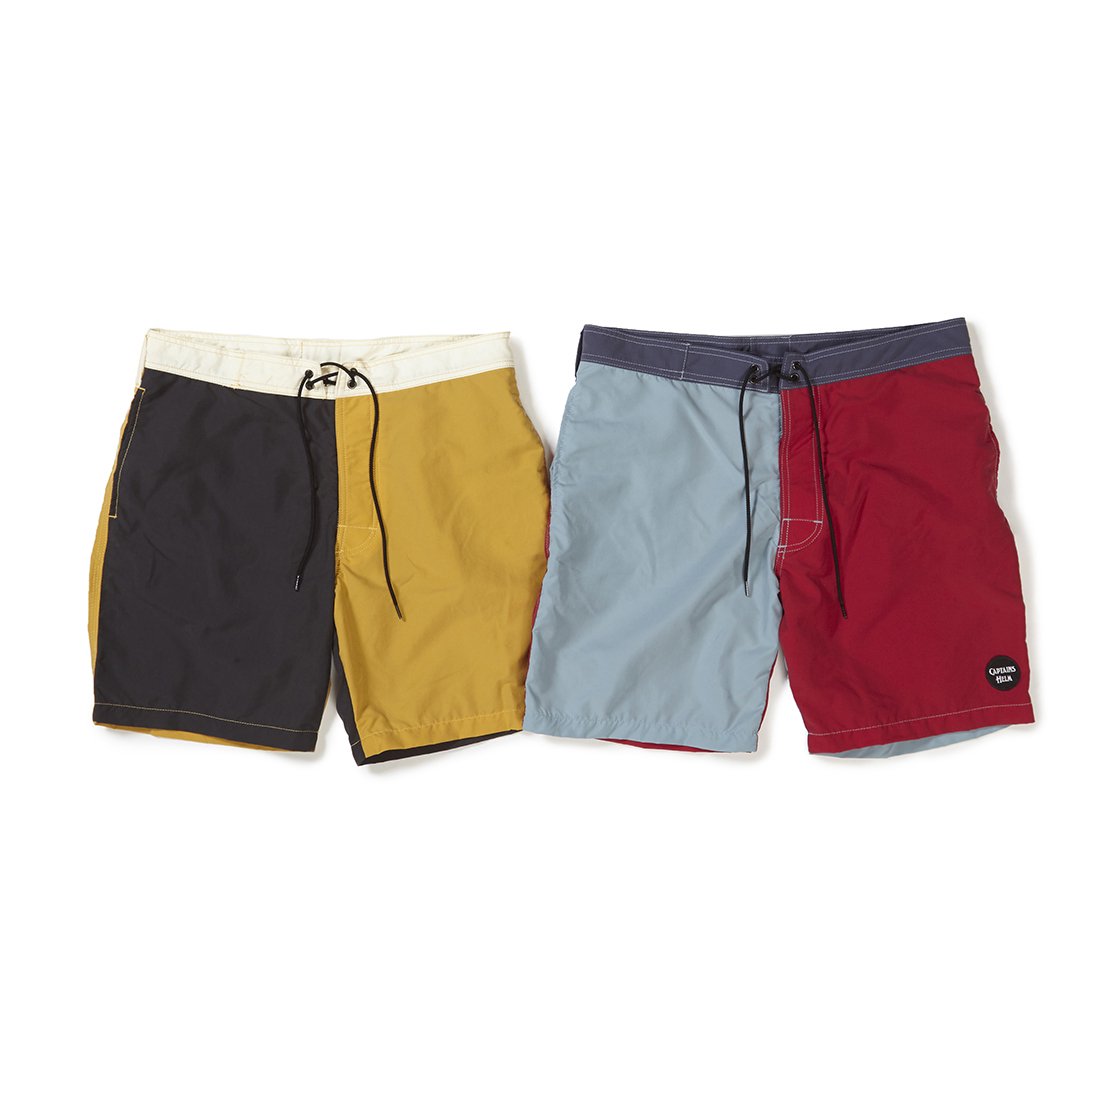 CAPTAINS HELM#CONTRAST PANEL BOARD SHORTS